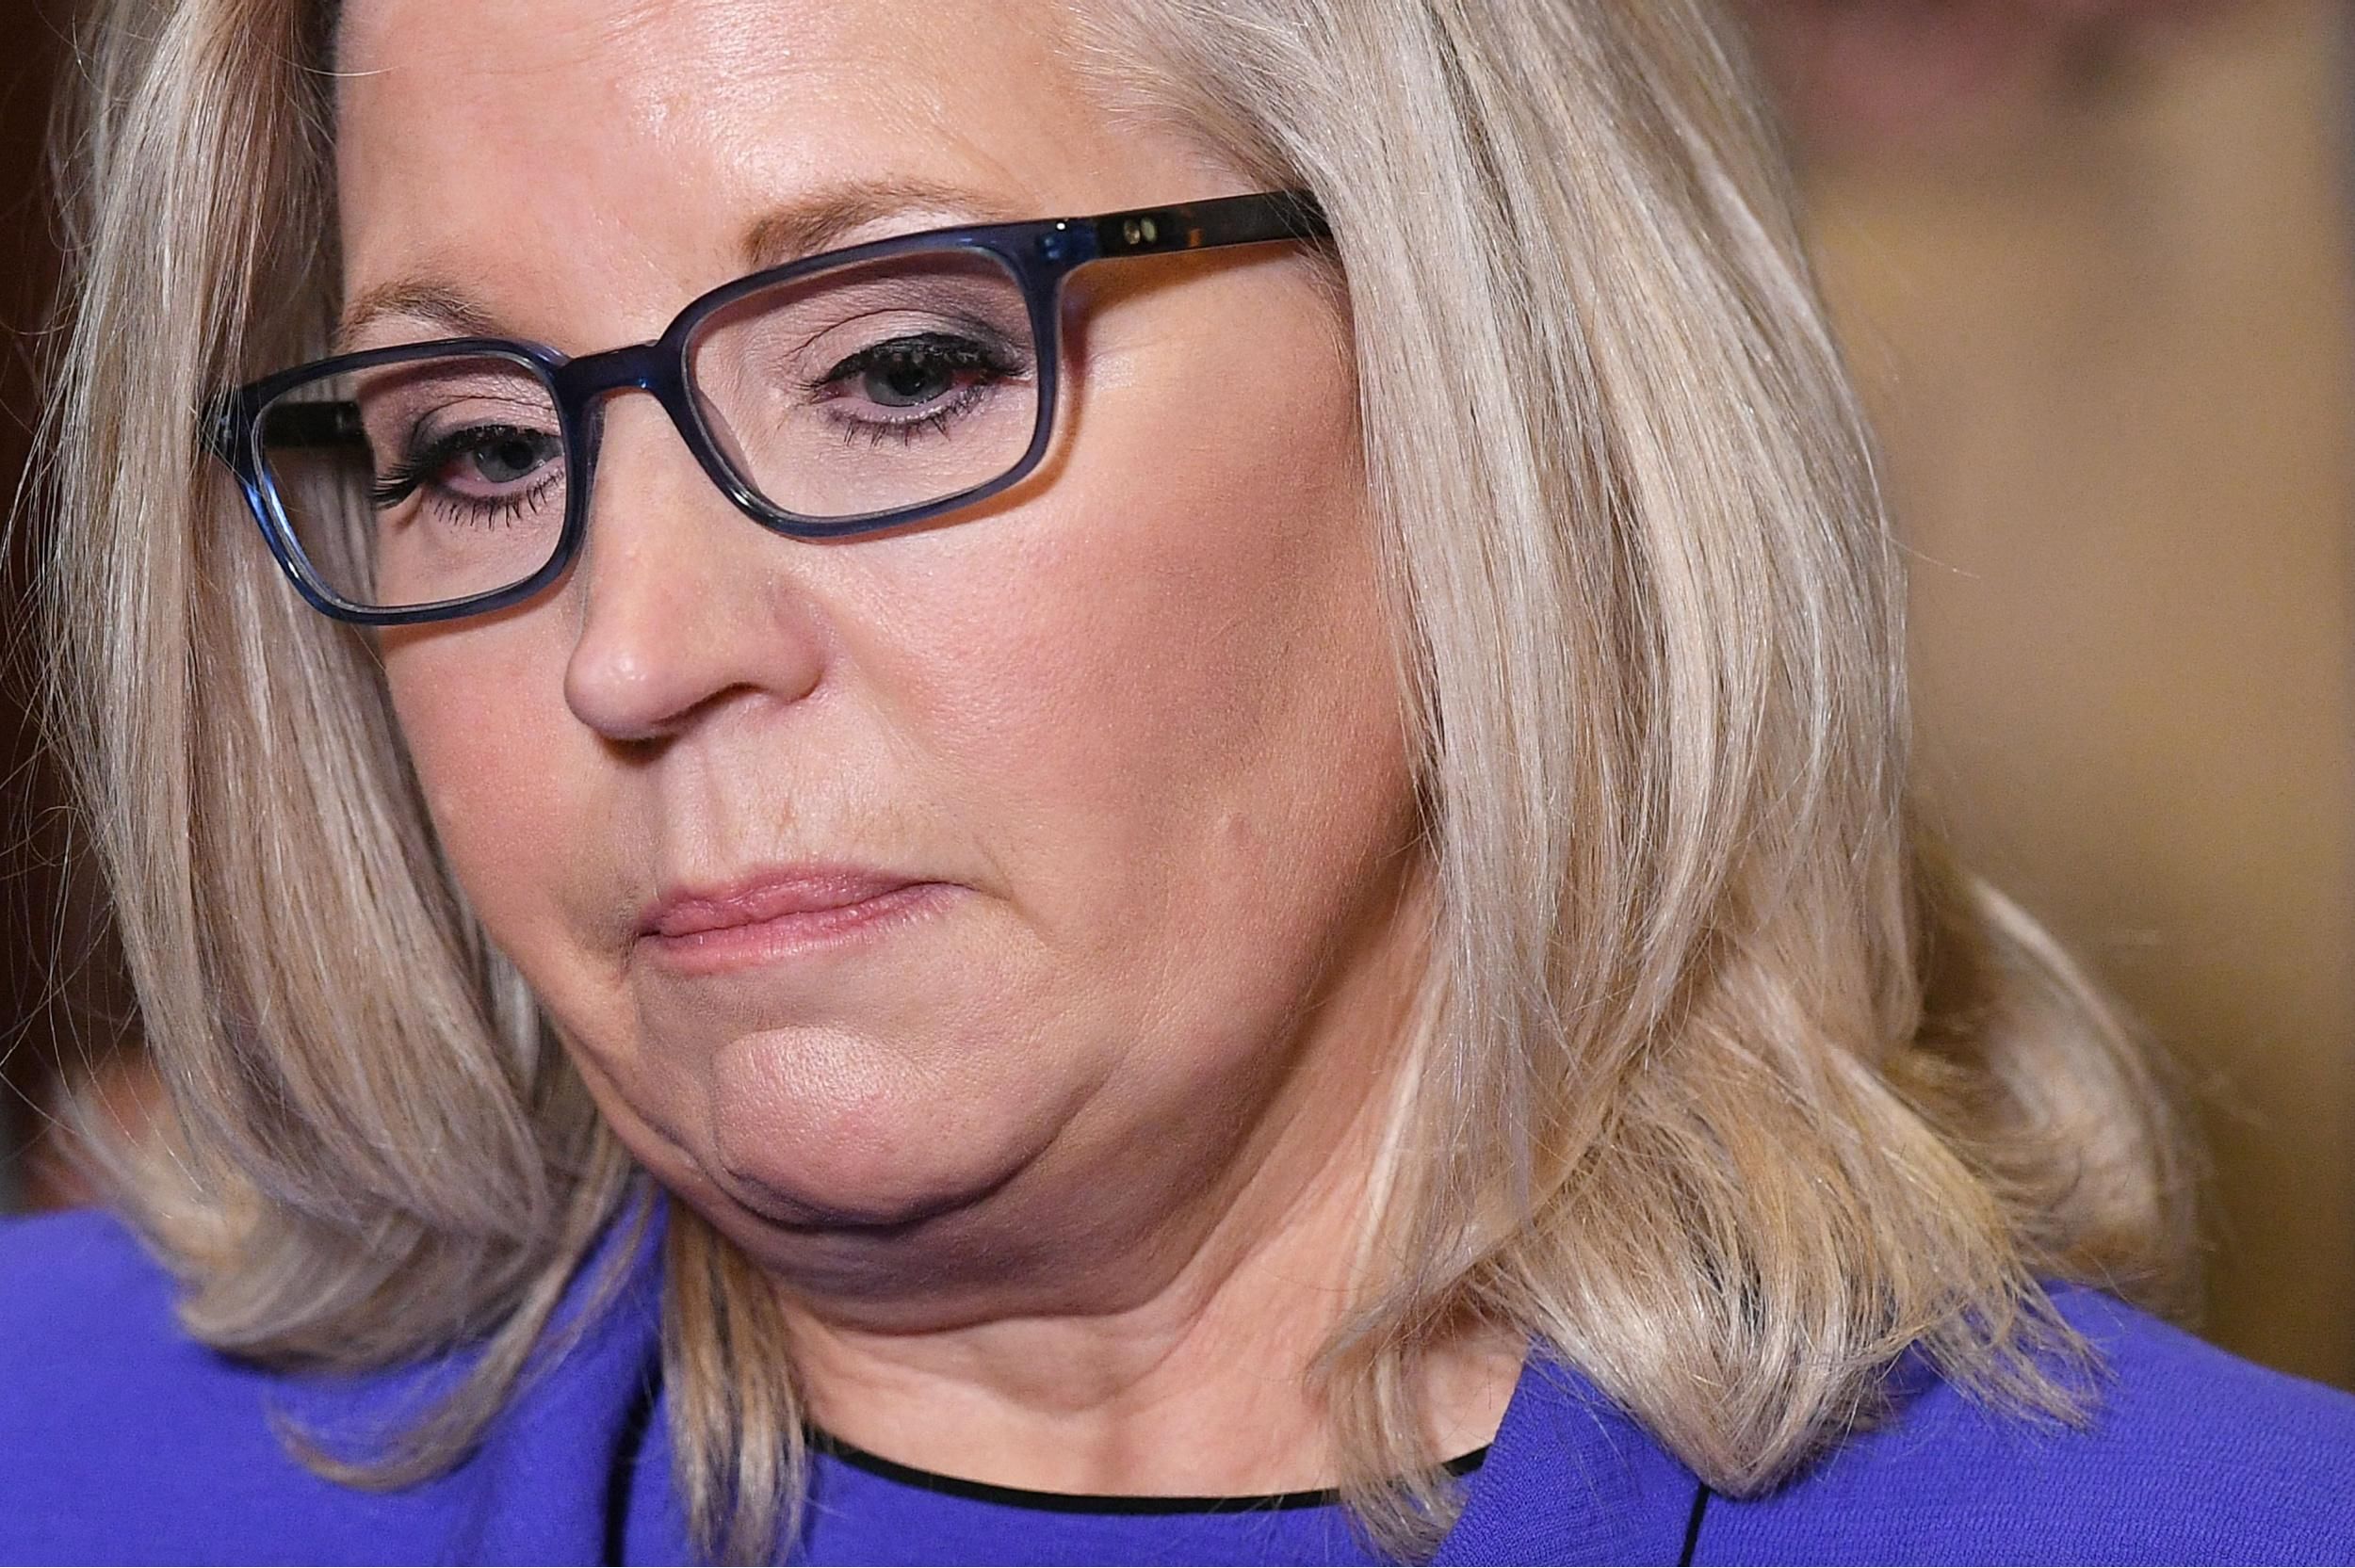 Rep. Liz Cheney (R-Wyo.) speaks during a press conference at the U.S. Capitol in Washington, D.C. on May 12, 2021 following her ouster as chair of the House Republican Conference. (Photo: Mandel Ngan/AFP via Getty Images) 